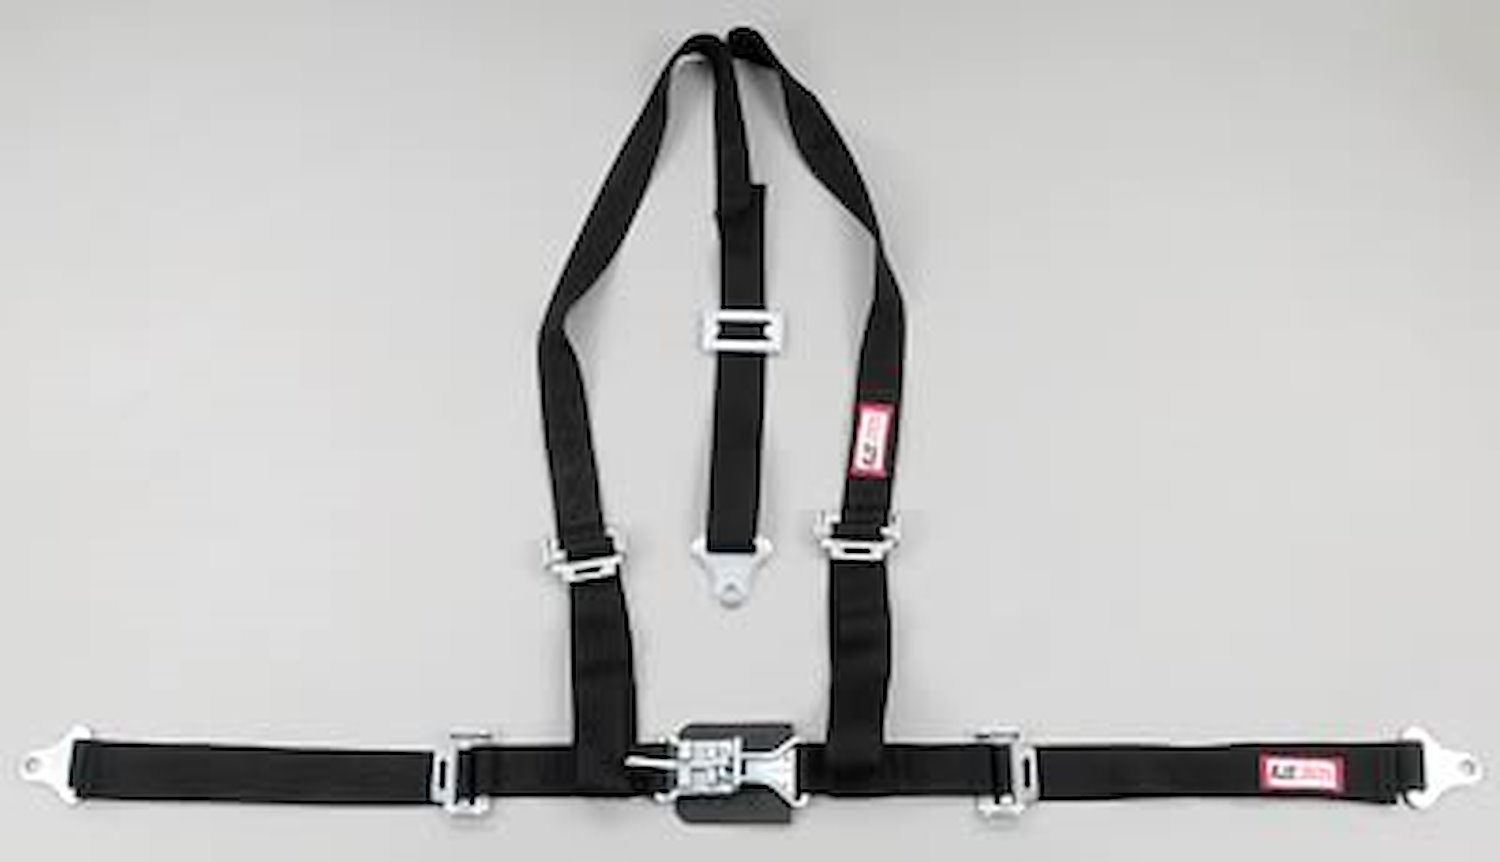 NON-SFI L&L HARNESS 3 PULL DOWN Lap BELT SEWN IN 2 S.H. Y FLOOR Mount w/STERNUM STRAP ALL WRAP ENDS PURPLE